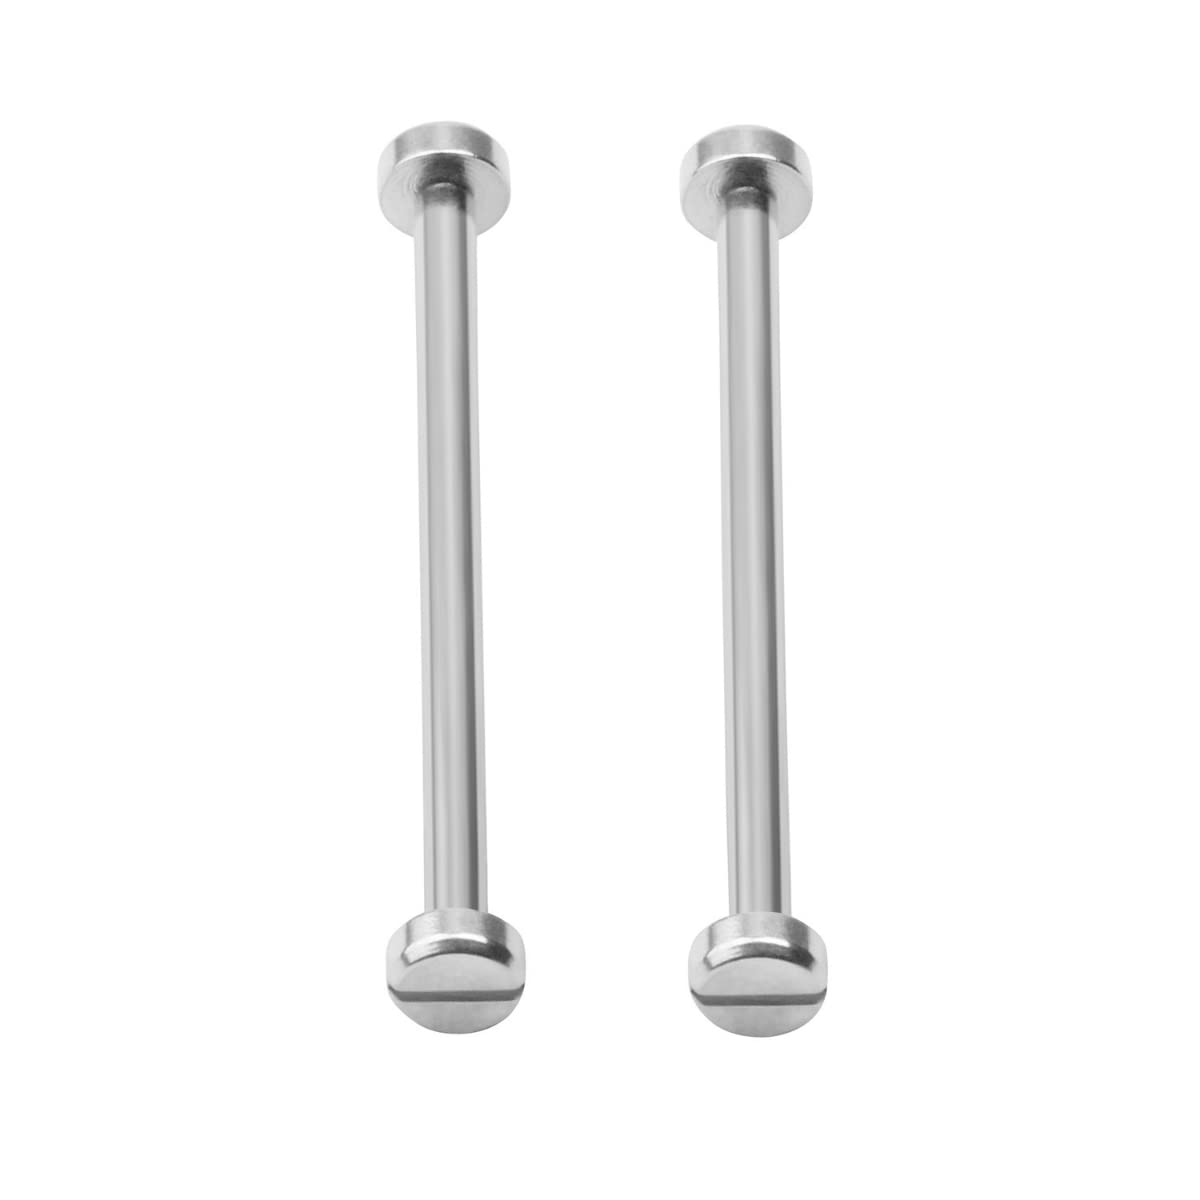 Ewatchparts SCREW PIN BAR ROD TUBE COMPATIBLE WITH NIXON 51-30 WATCH LUG STRAP BAND KIT S/STEEL SILVER